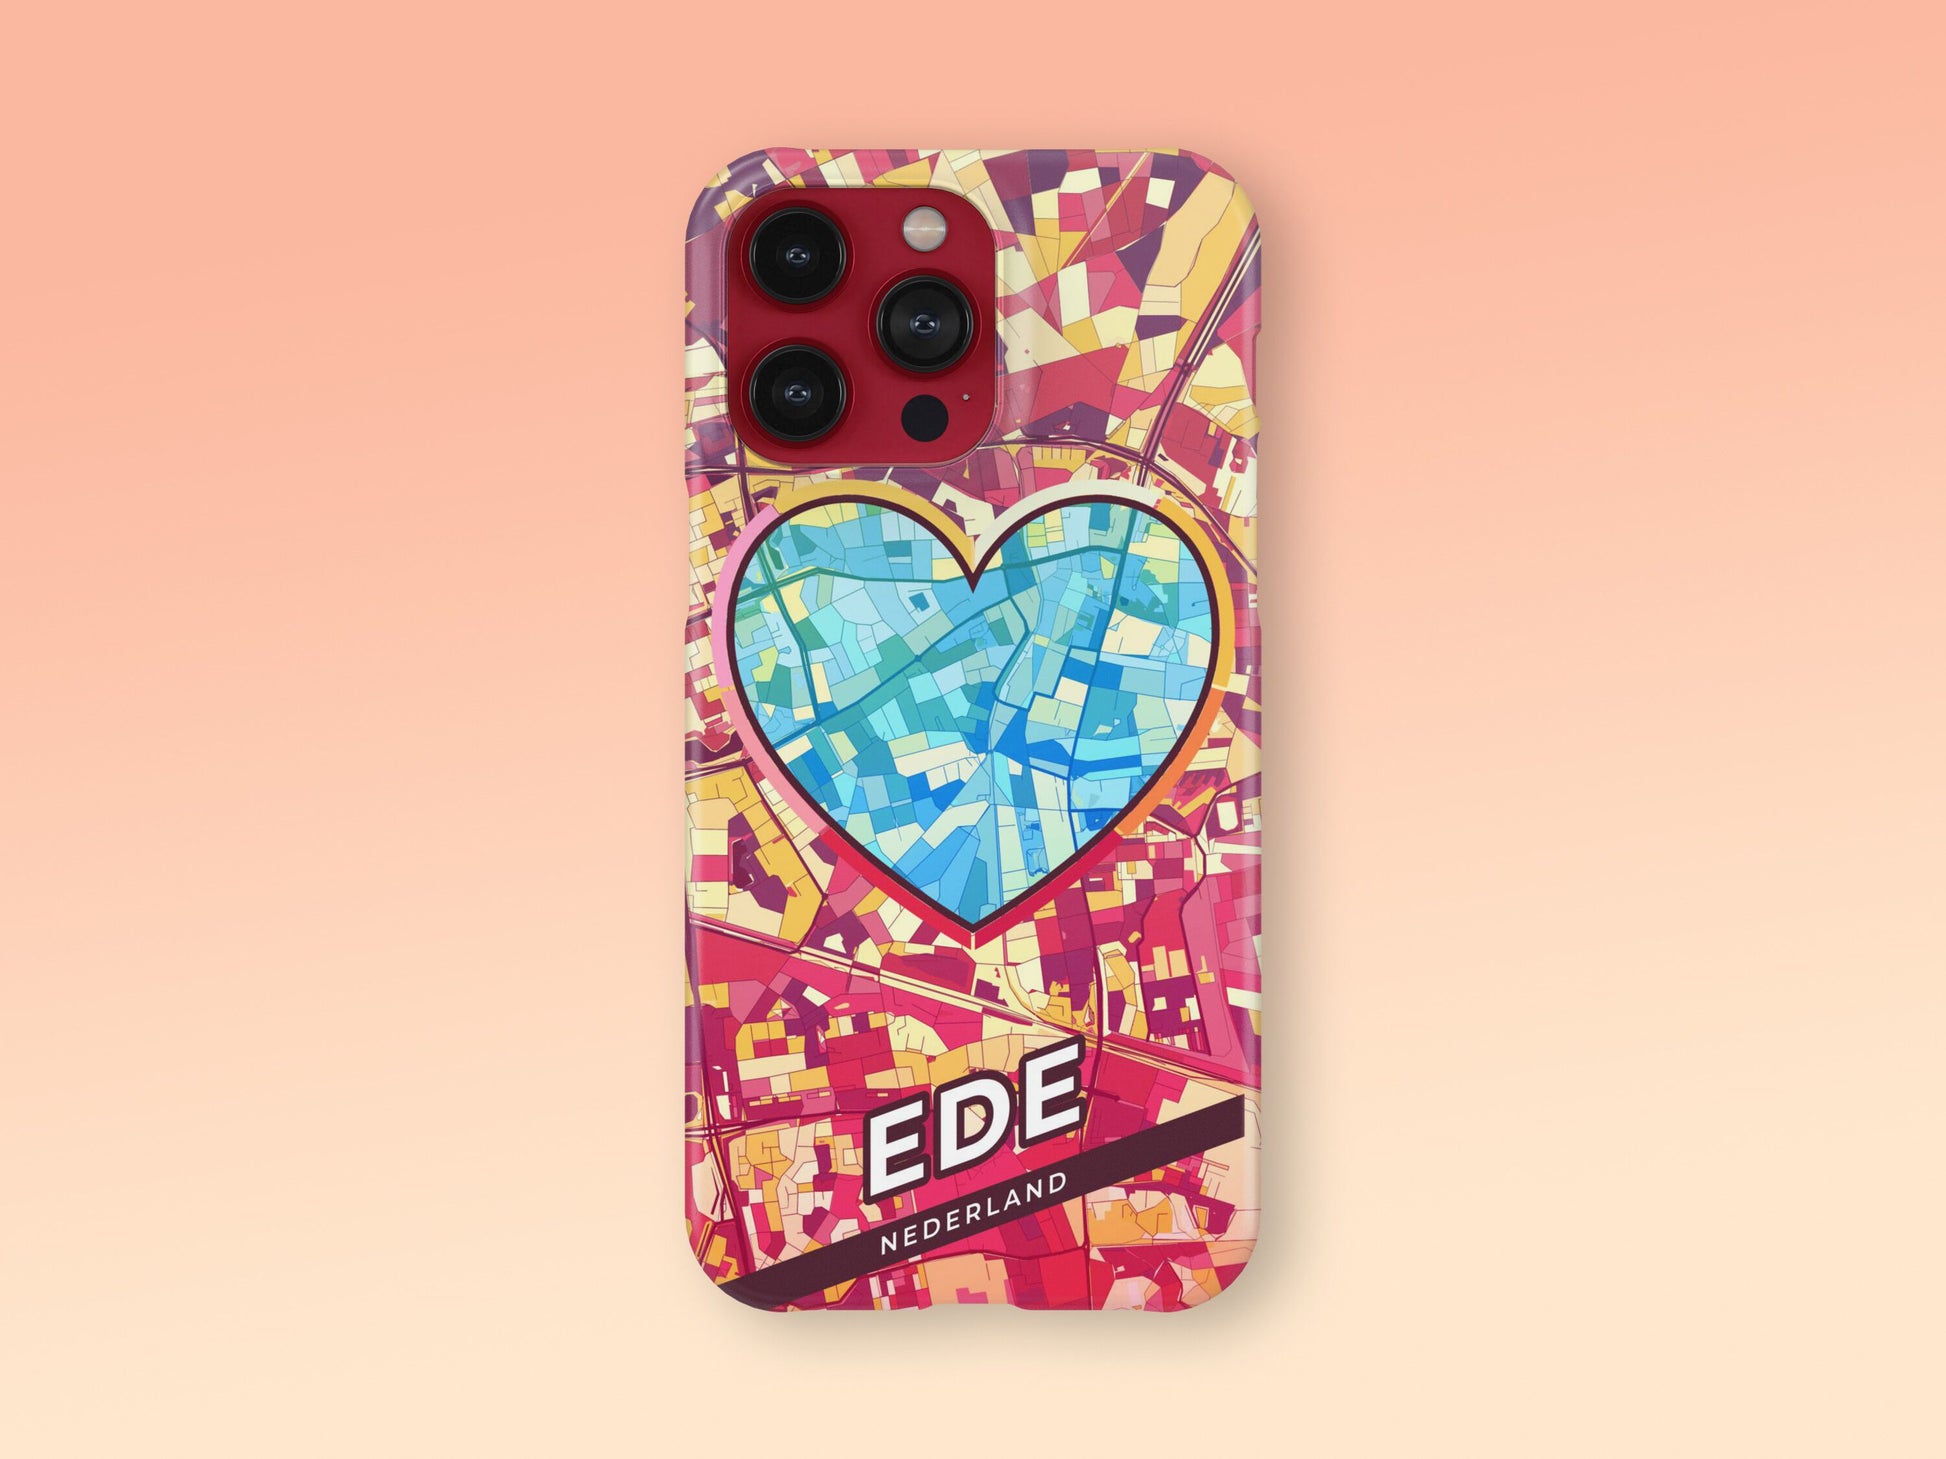 Ede Netherlands slim phone case with colorful icon. Birthday, wedding or housewarming gift. Couple match cases. 2